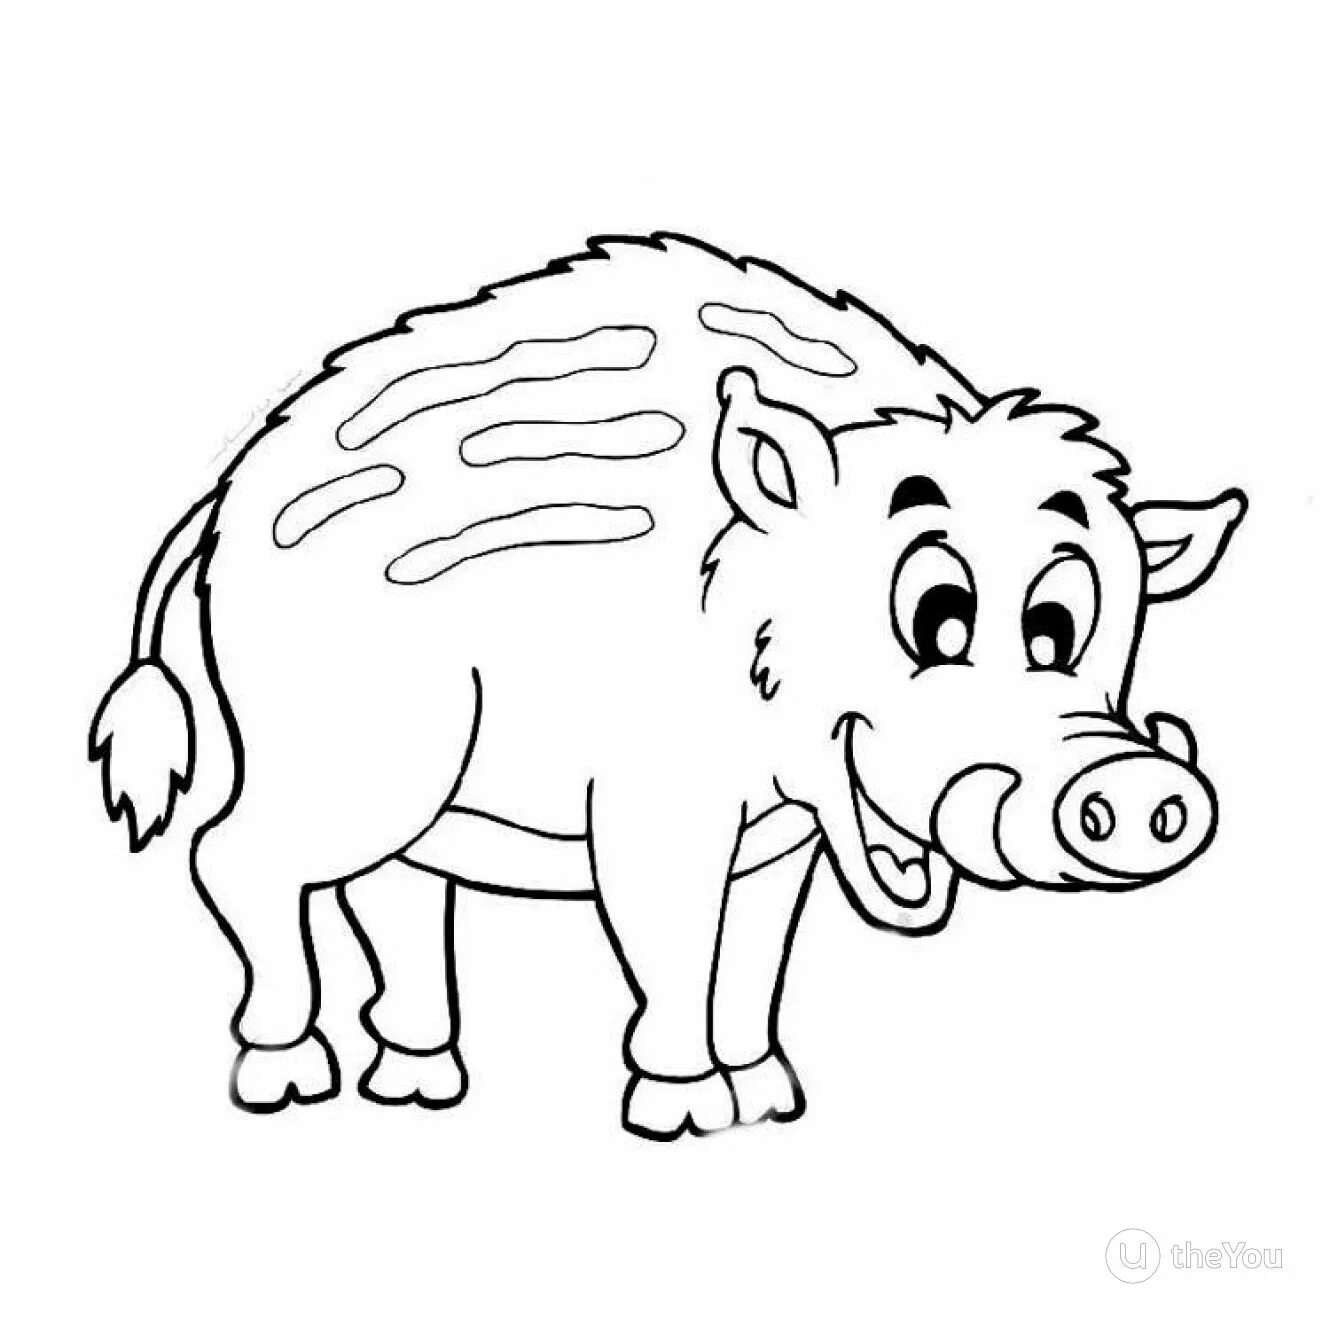 Animated boar coloring page